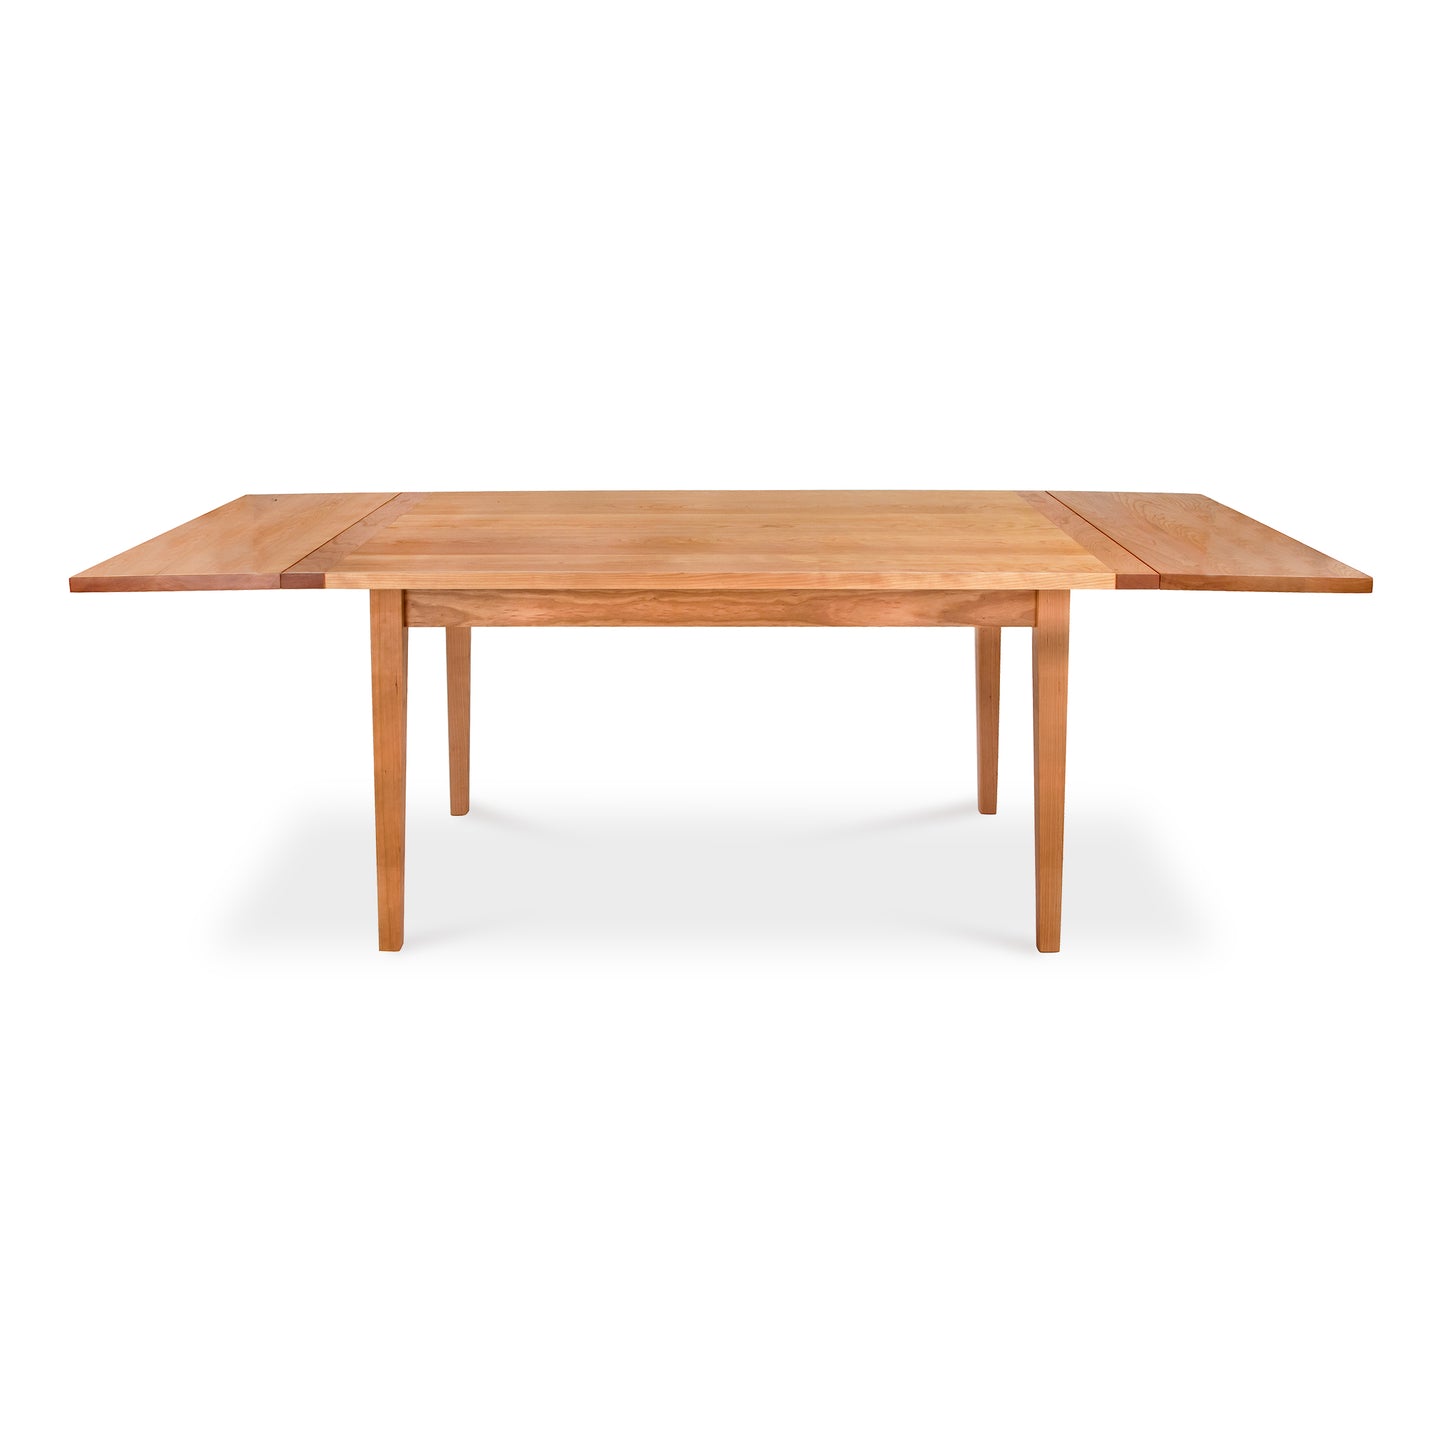 Maple Corner Woodworks Vermont Shaker Harvest Extension Dining Table, sustainably harvested woods, isolated on a white background.